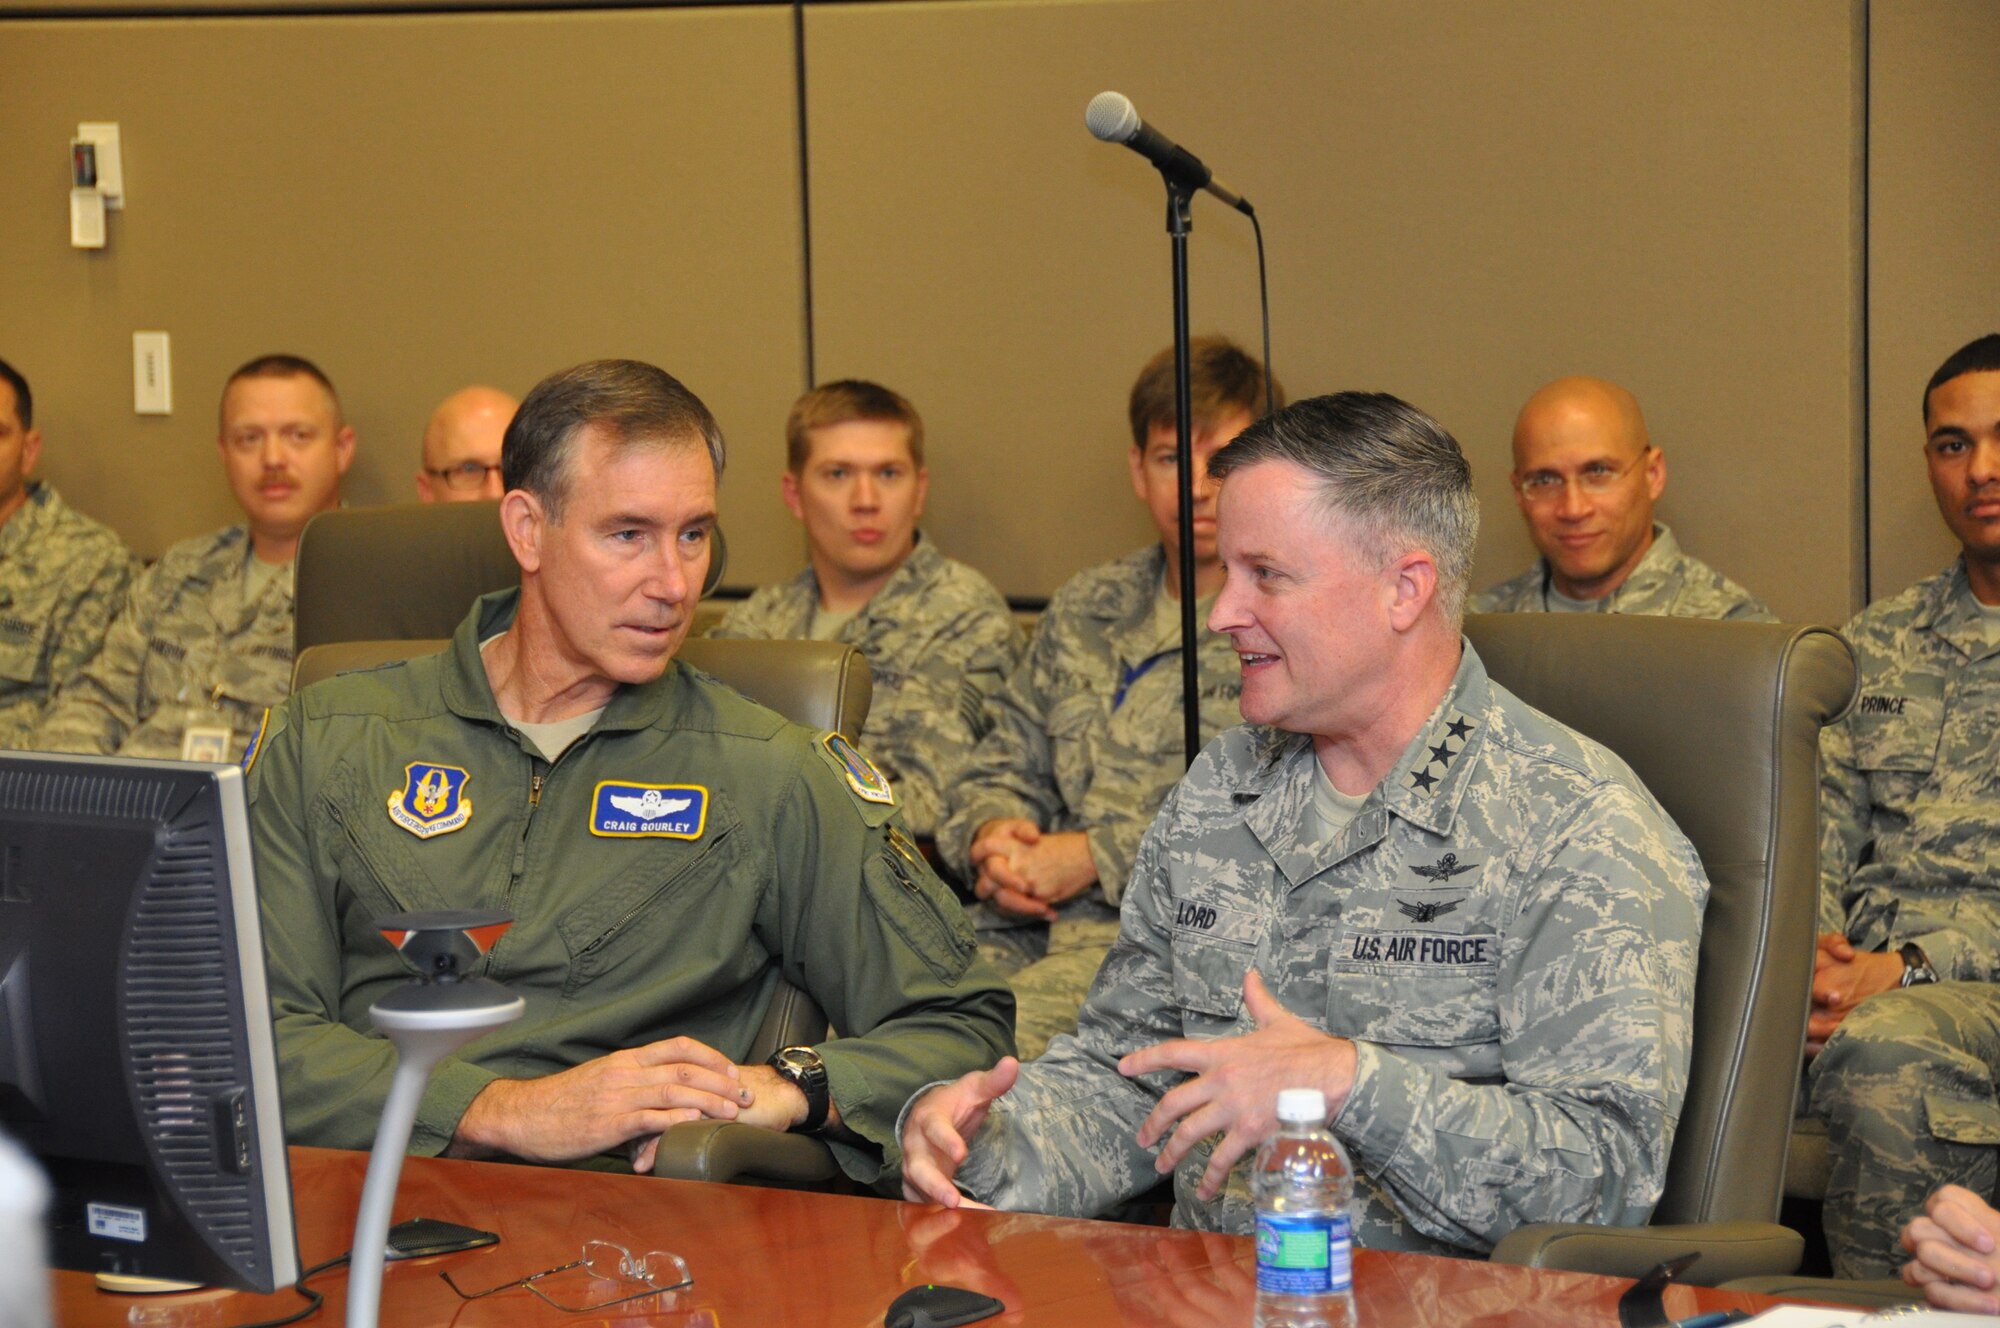 ROBINS AIR FORCE BASE, Ga. -- Lt. Gen. William T. Lord, Air Force chief of Warfighting Integration and Chief Information Officer, converses with Maj. Gen. Craig Neil Gourley, Air Force Reserve Command vice commander, just before a video teleconference session with the command's cyber warriors in the AFRC headquarters conference room. General Lord visited AFRC and the 689th Combat Communications Wing here, Jan. 6-7, 2012. (U.S. Air Force photo/Capt. Polly Orcutt)